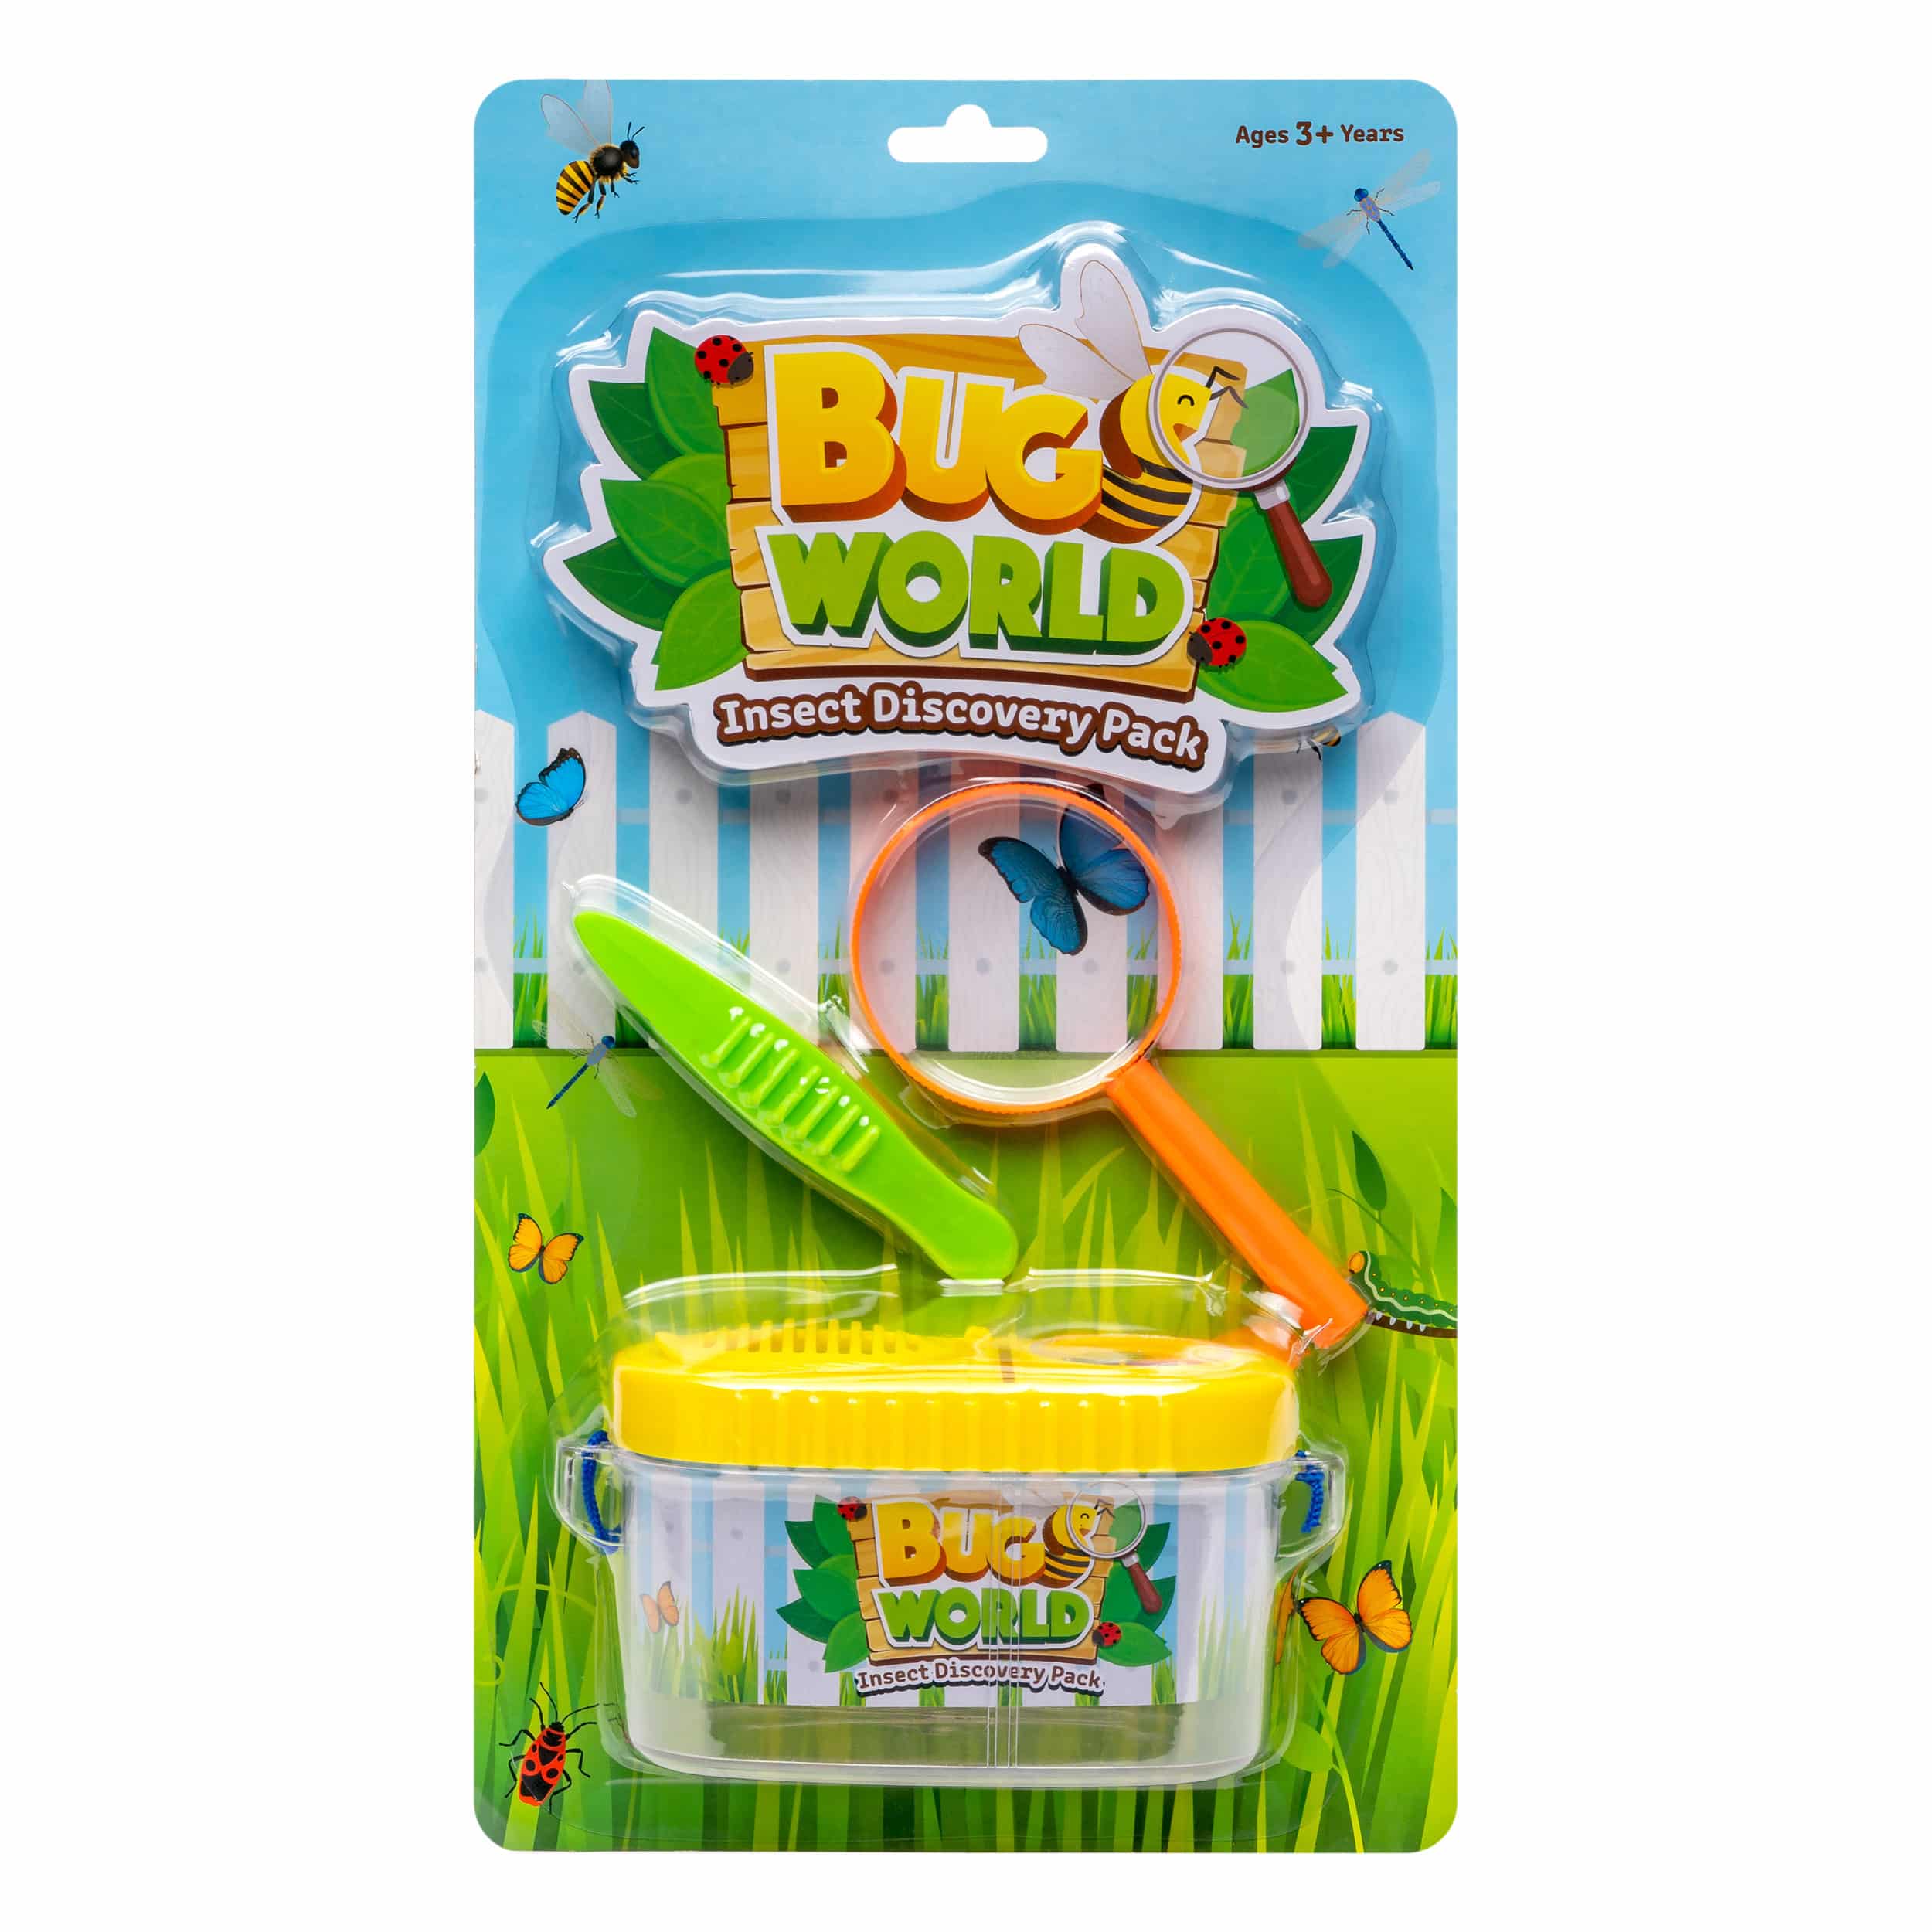 Bugs World - Inspect Discovery Pack